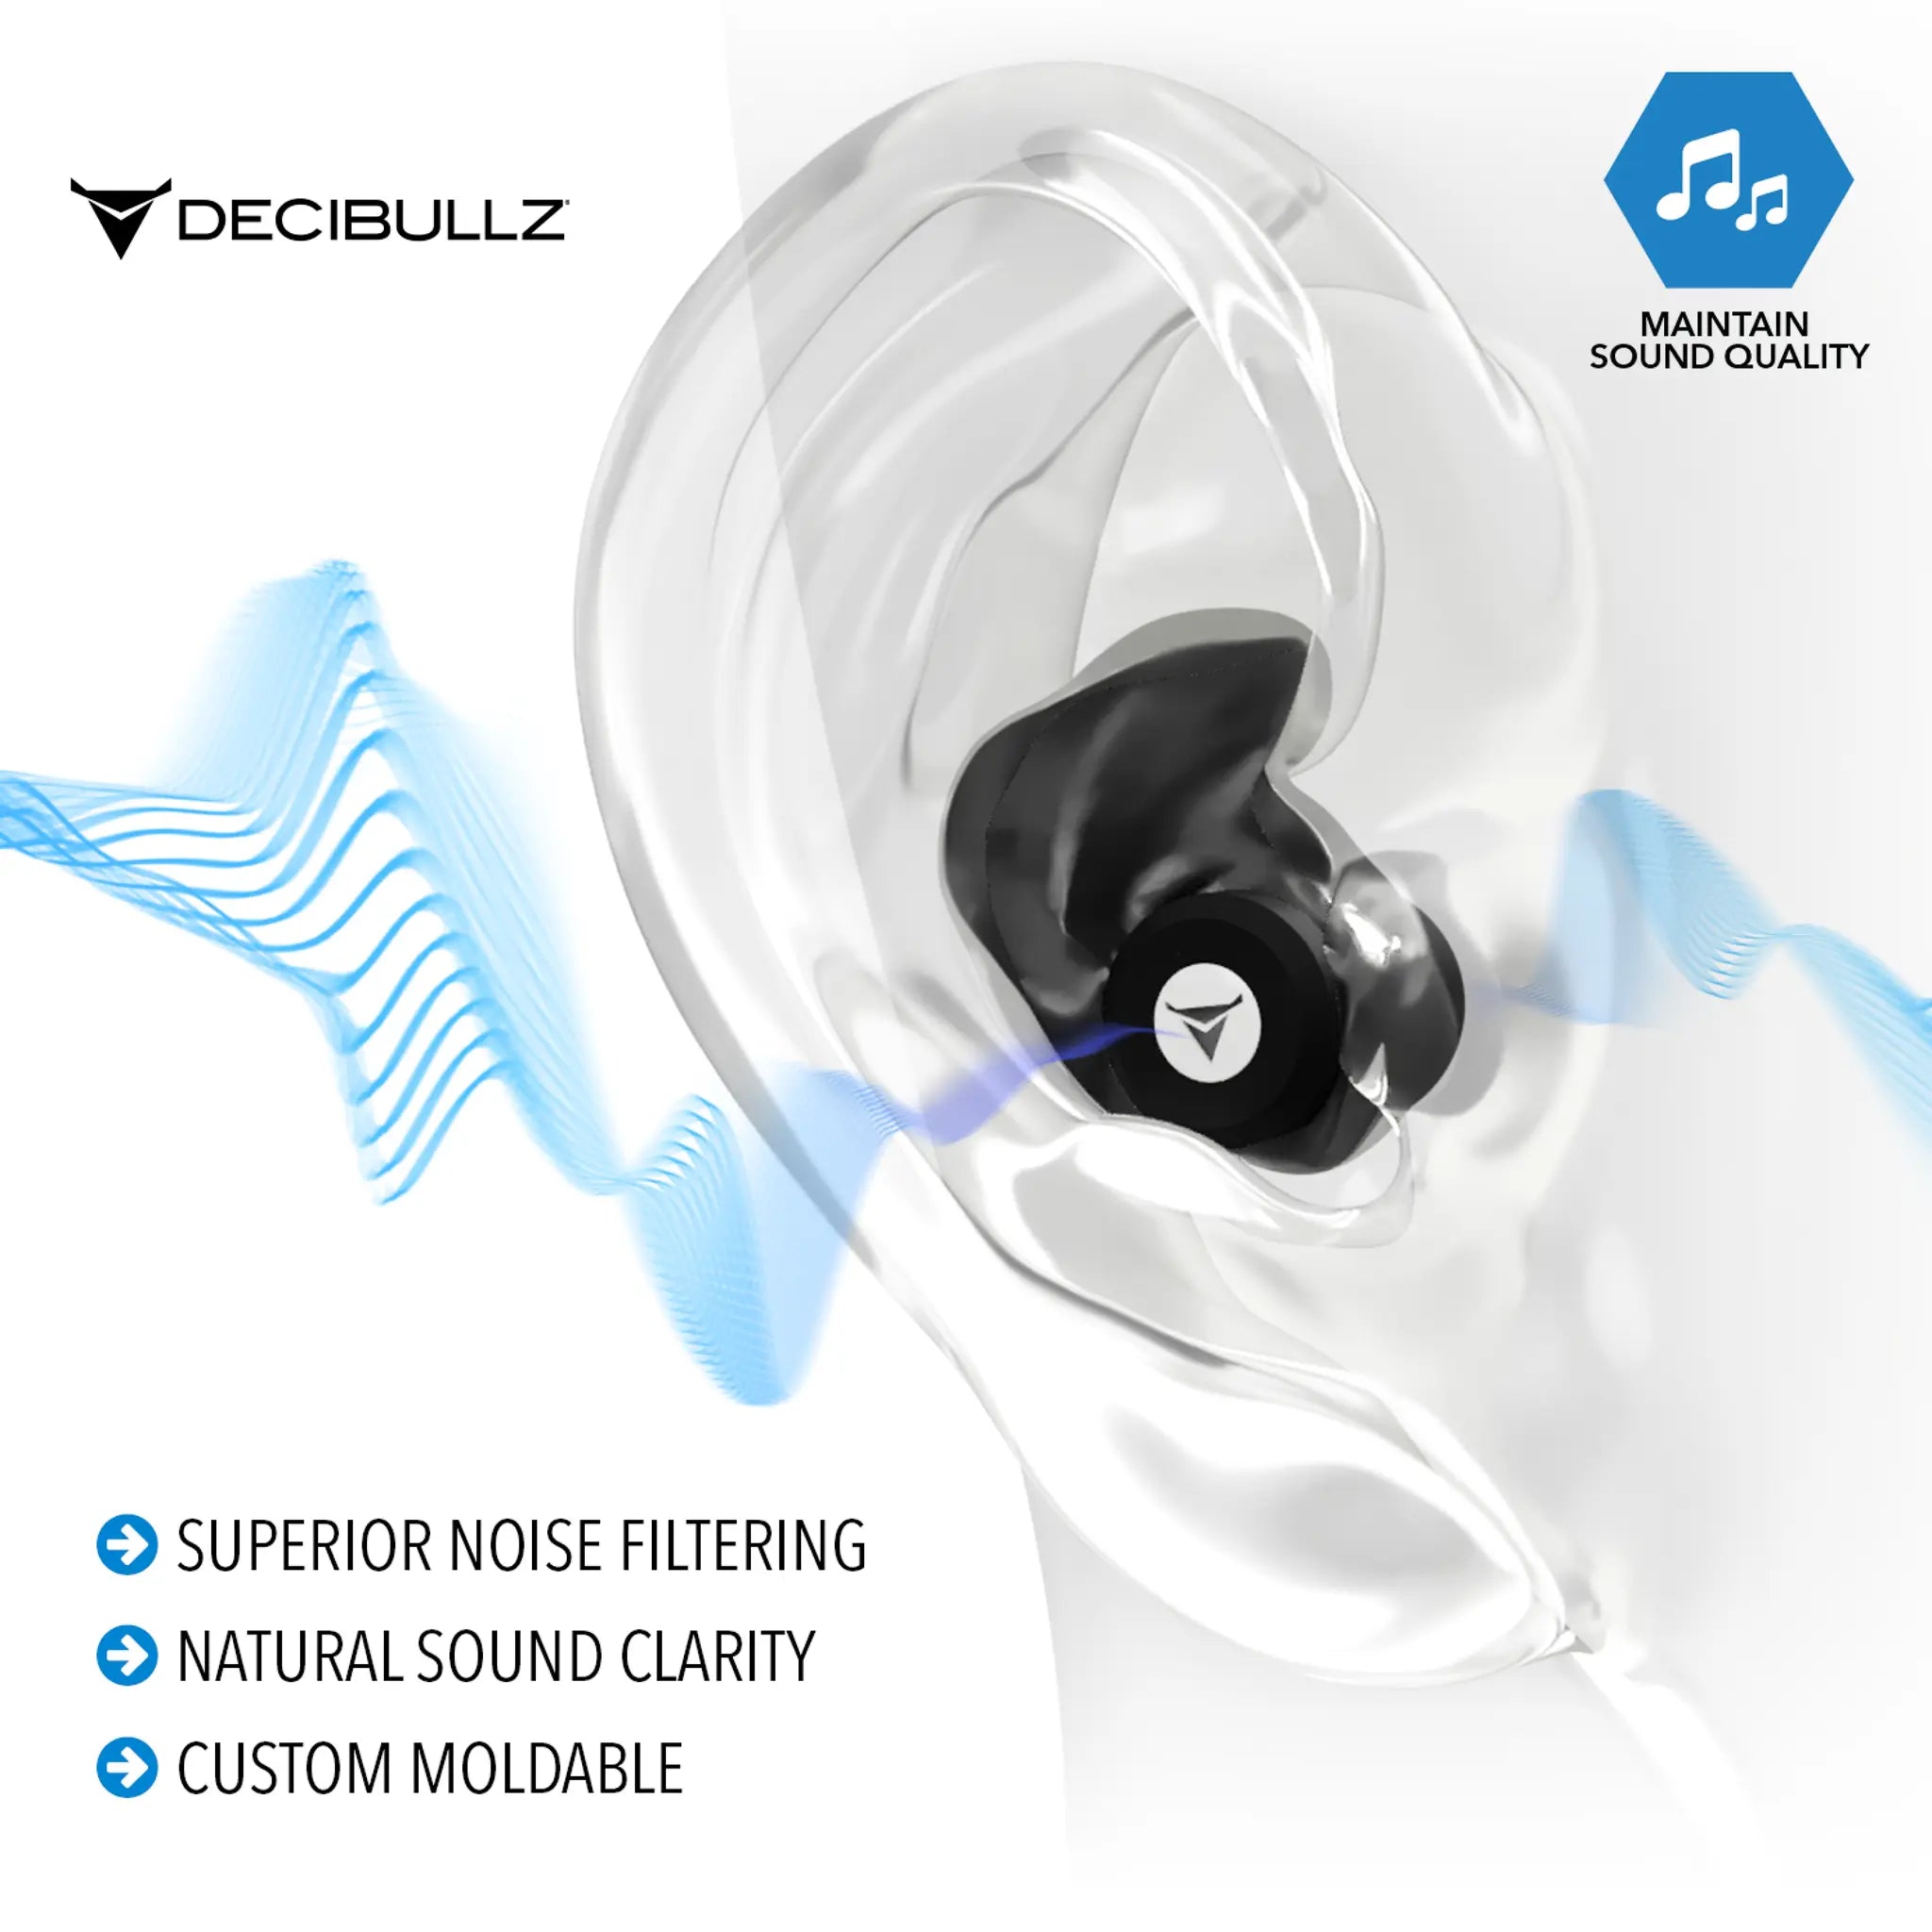 Custom Molded High-Fidelity Earplugs for Concerts, Musicians, Events, and Noise Sensitivity